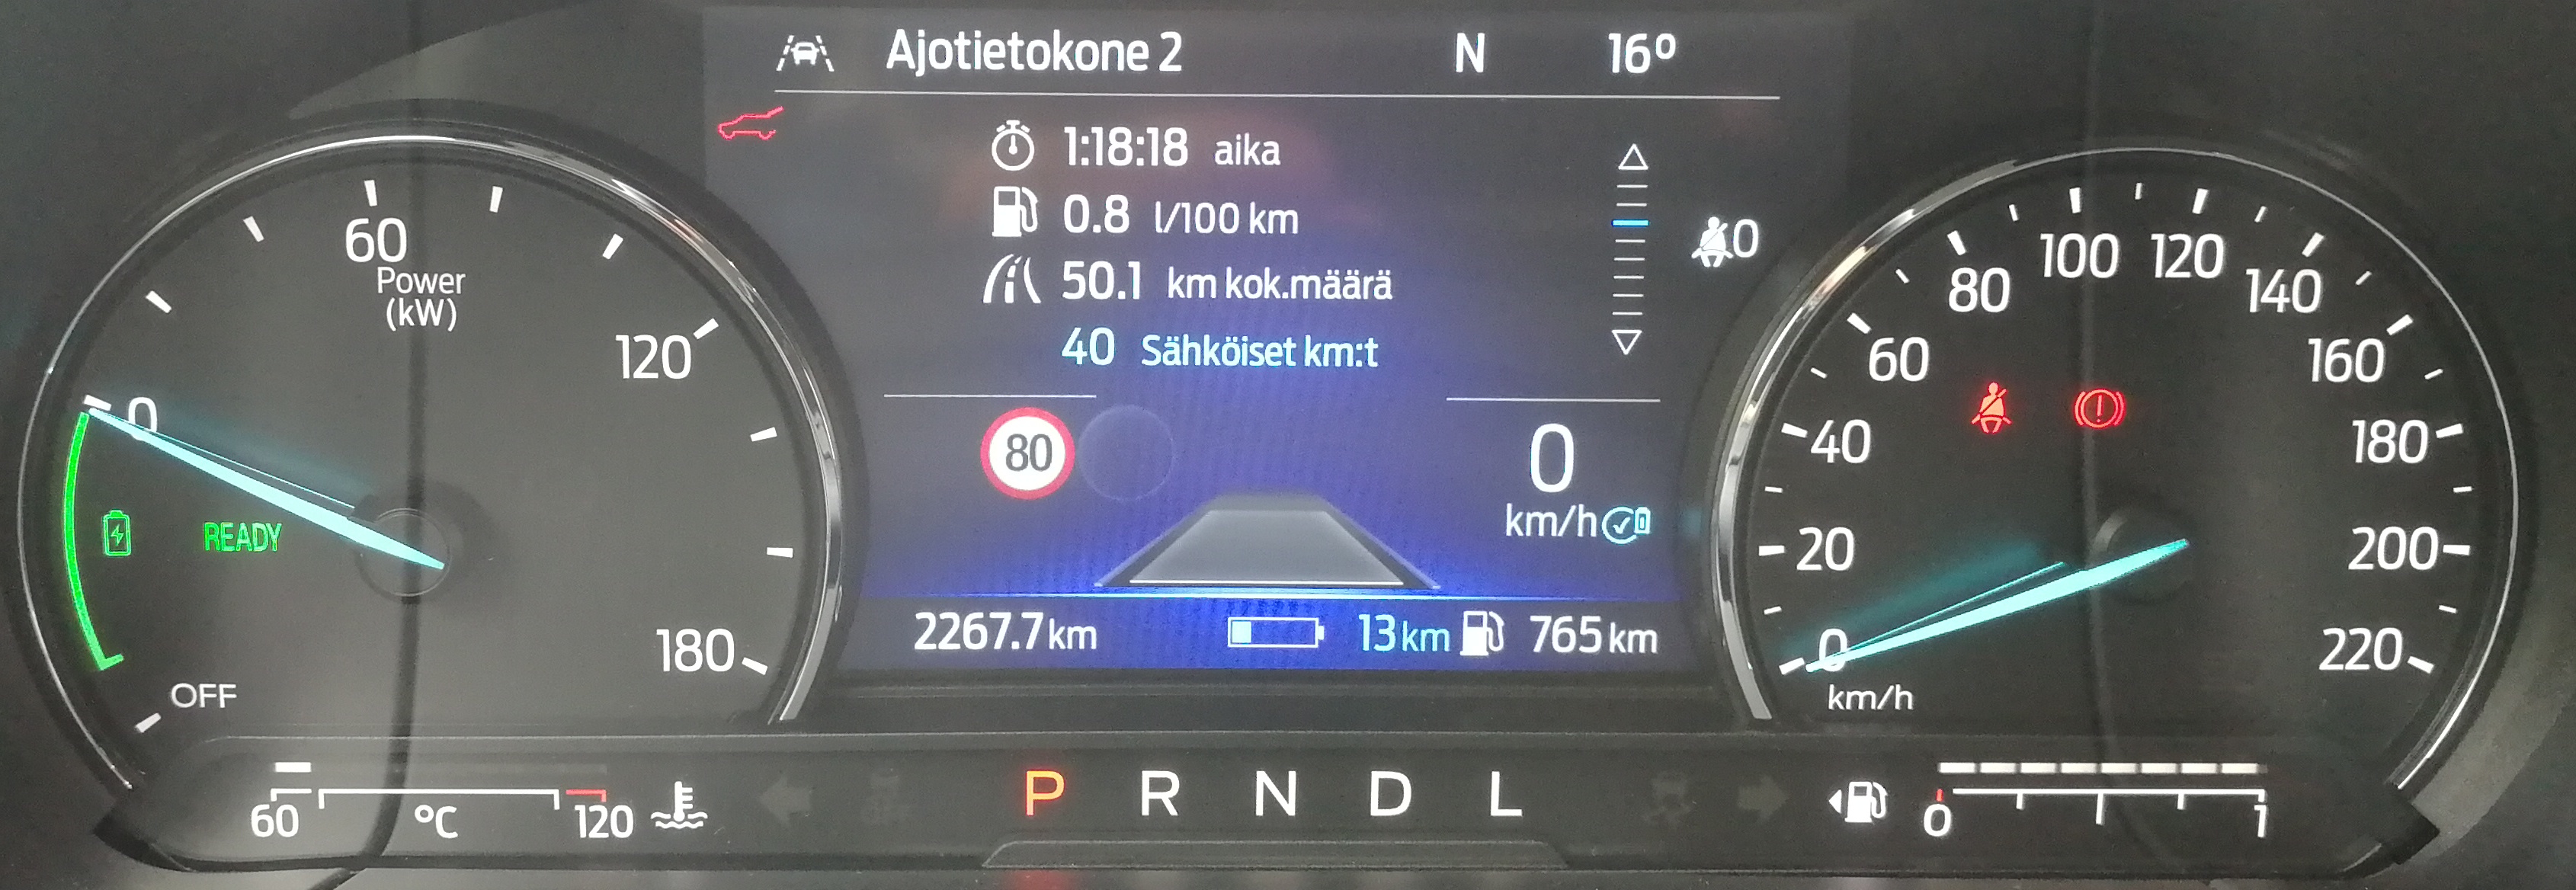 Ford Kuga PHEV consumpiton 0,8 l/100 km for 50 km trip with full battery